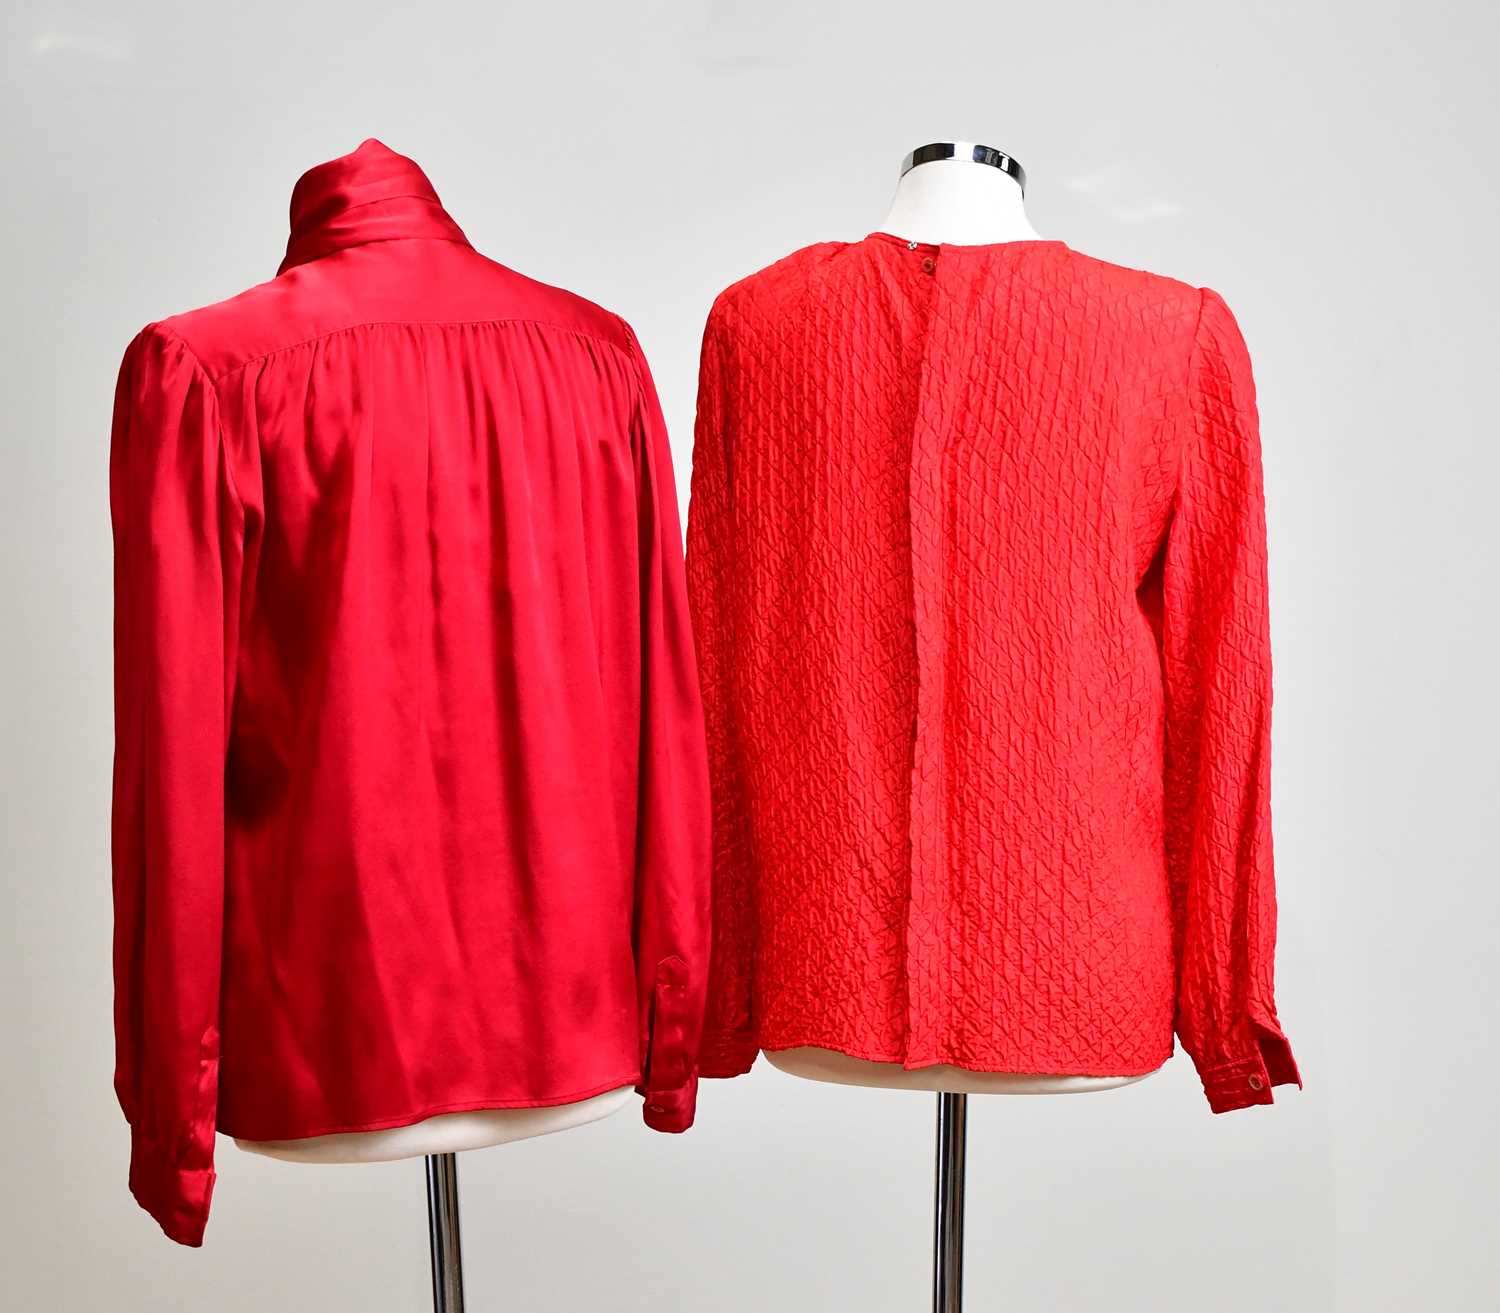 CHANEL; a 100% red silk vest top, measures 38" bust, and matching red jacket with gold tone - Image 5 of 6